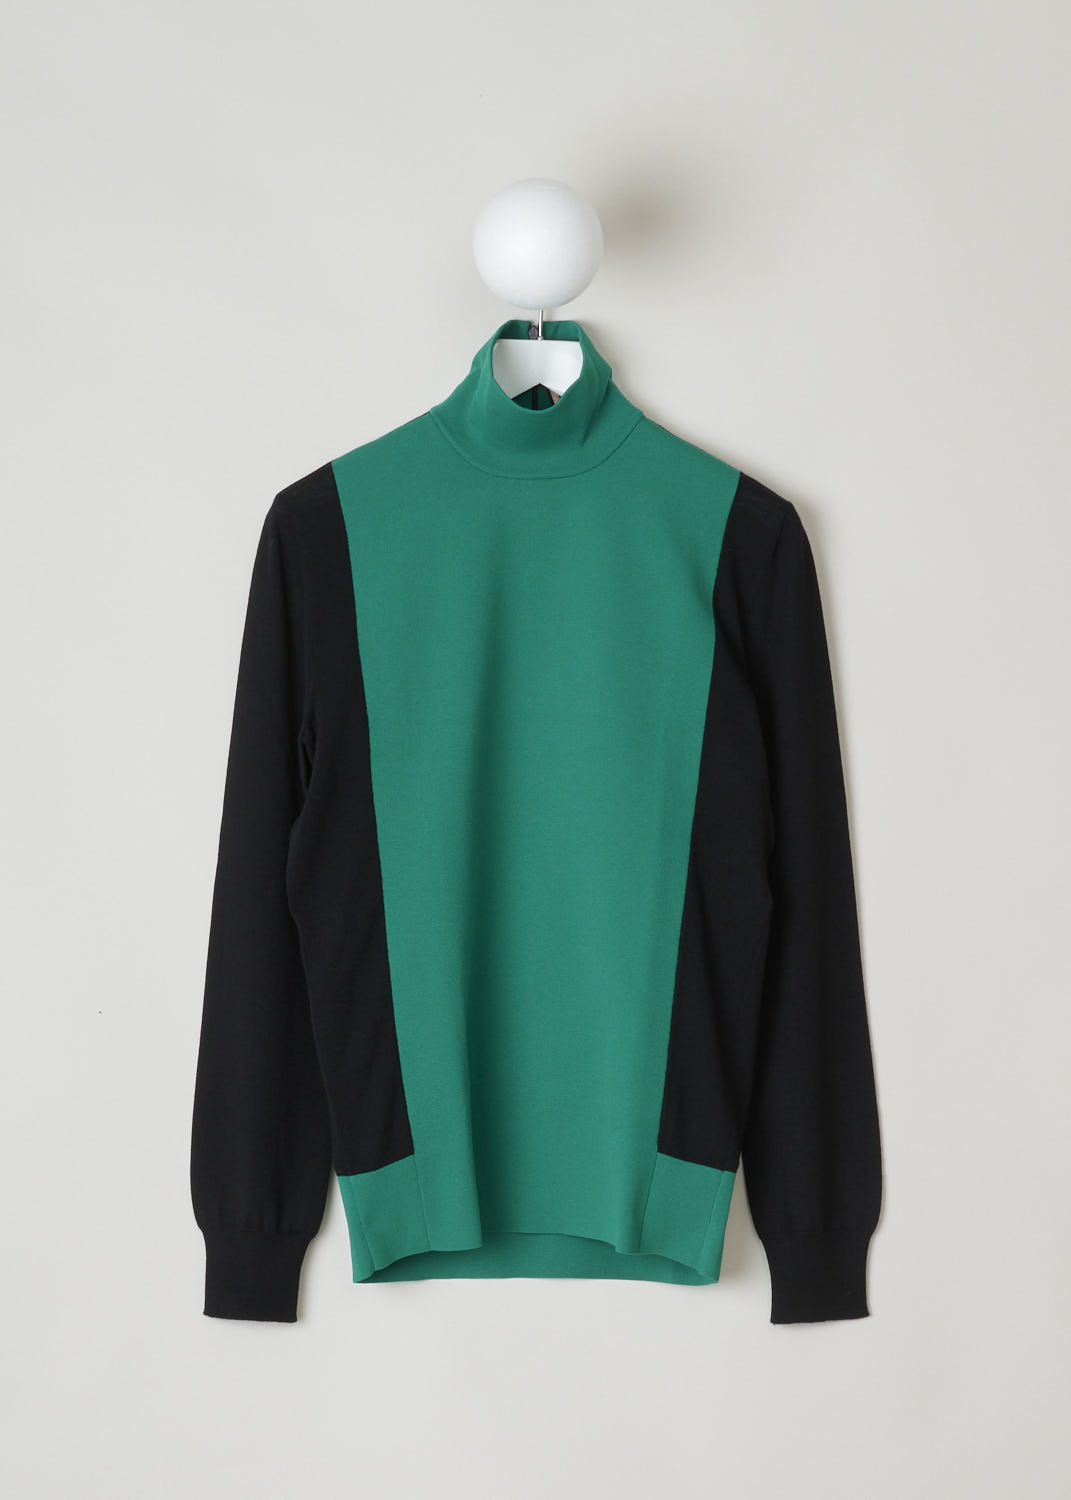 PLAN C, TWO-TONE TURTLENECK SWEATER, DVCMC51KG0_FW003_Z3052, Black, Green, Front, Beautiful two-toned turtleneck. The long sleeves and back are a deep black and the front and neck are green. In the back of the neck, a concealed zipper can be found.
